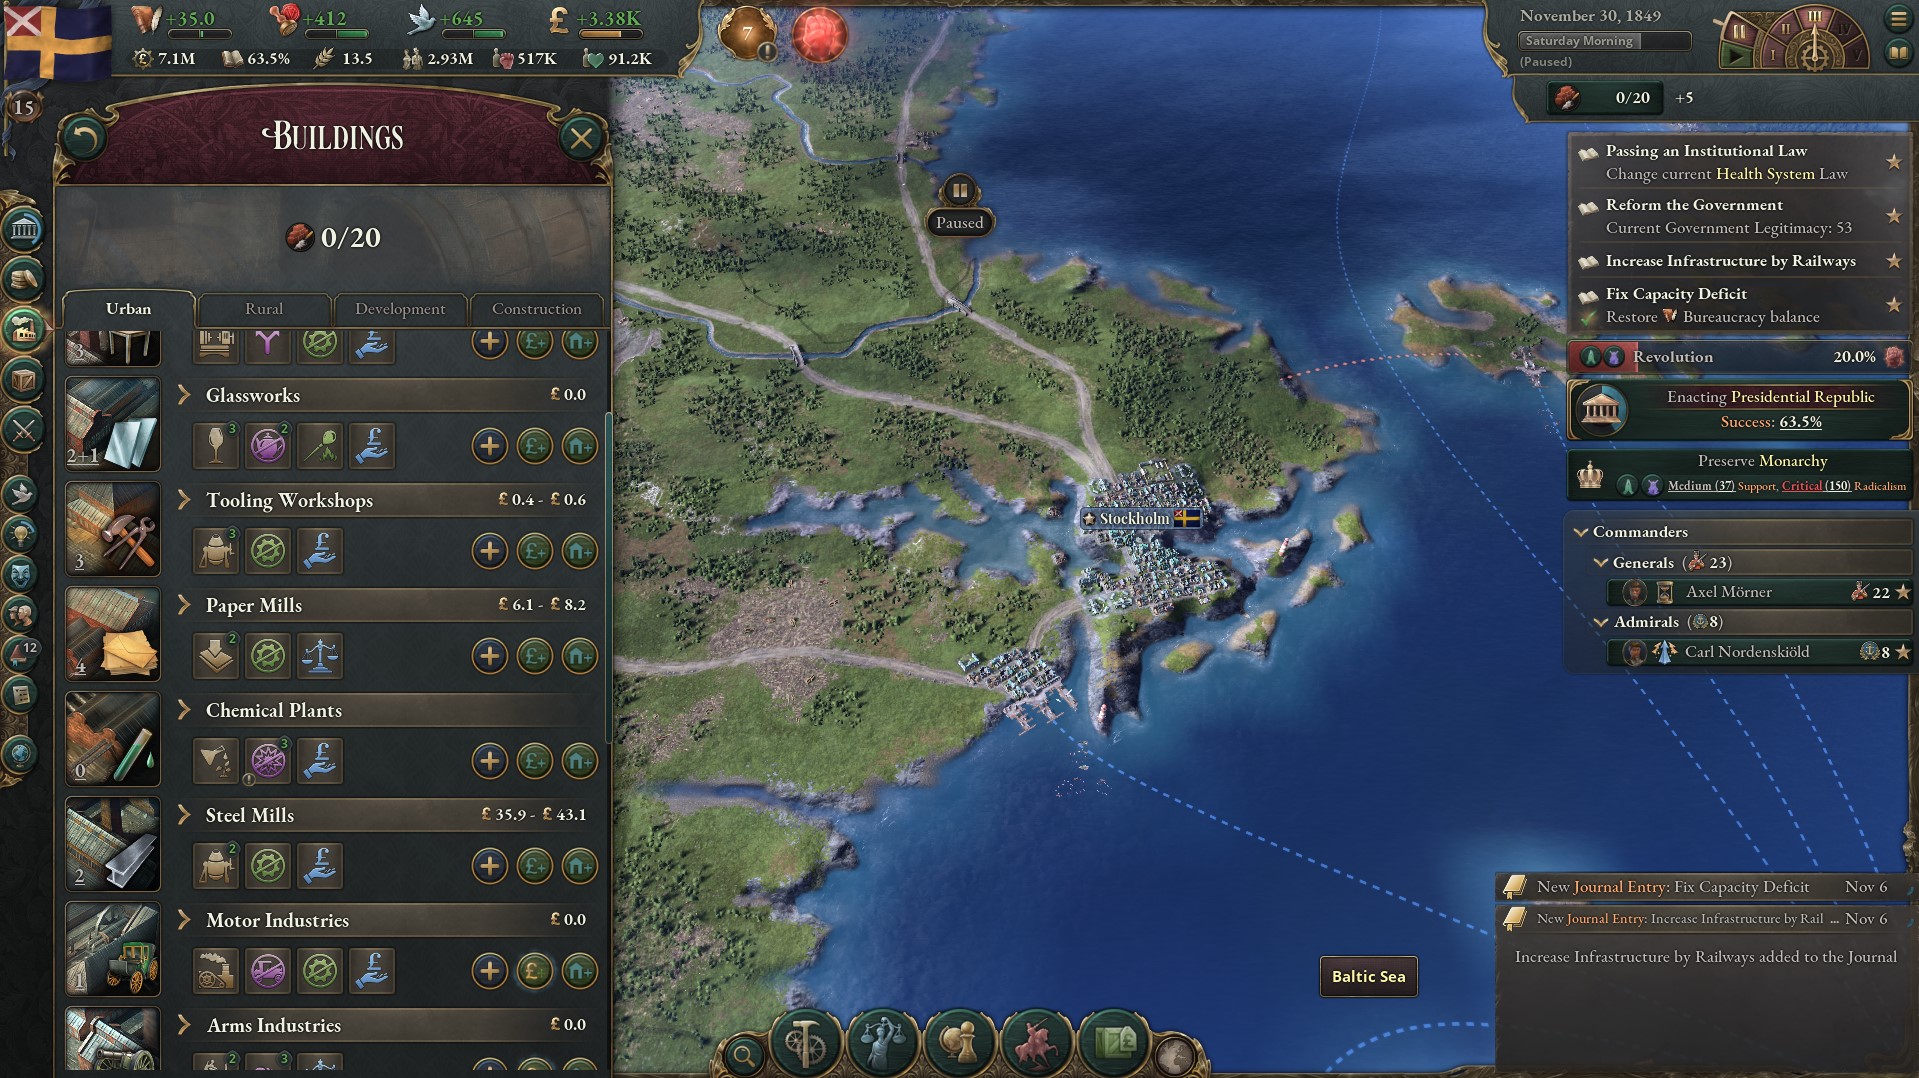 Victoria 3 screenshot showing different buildings